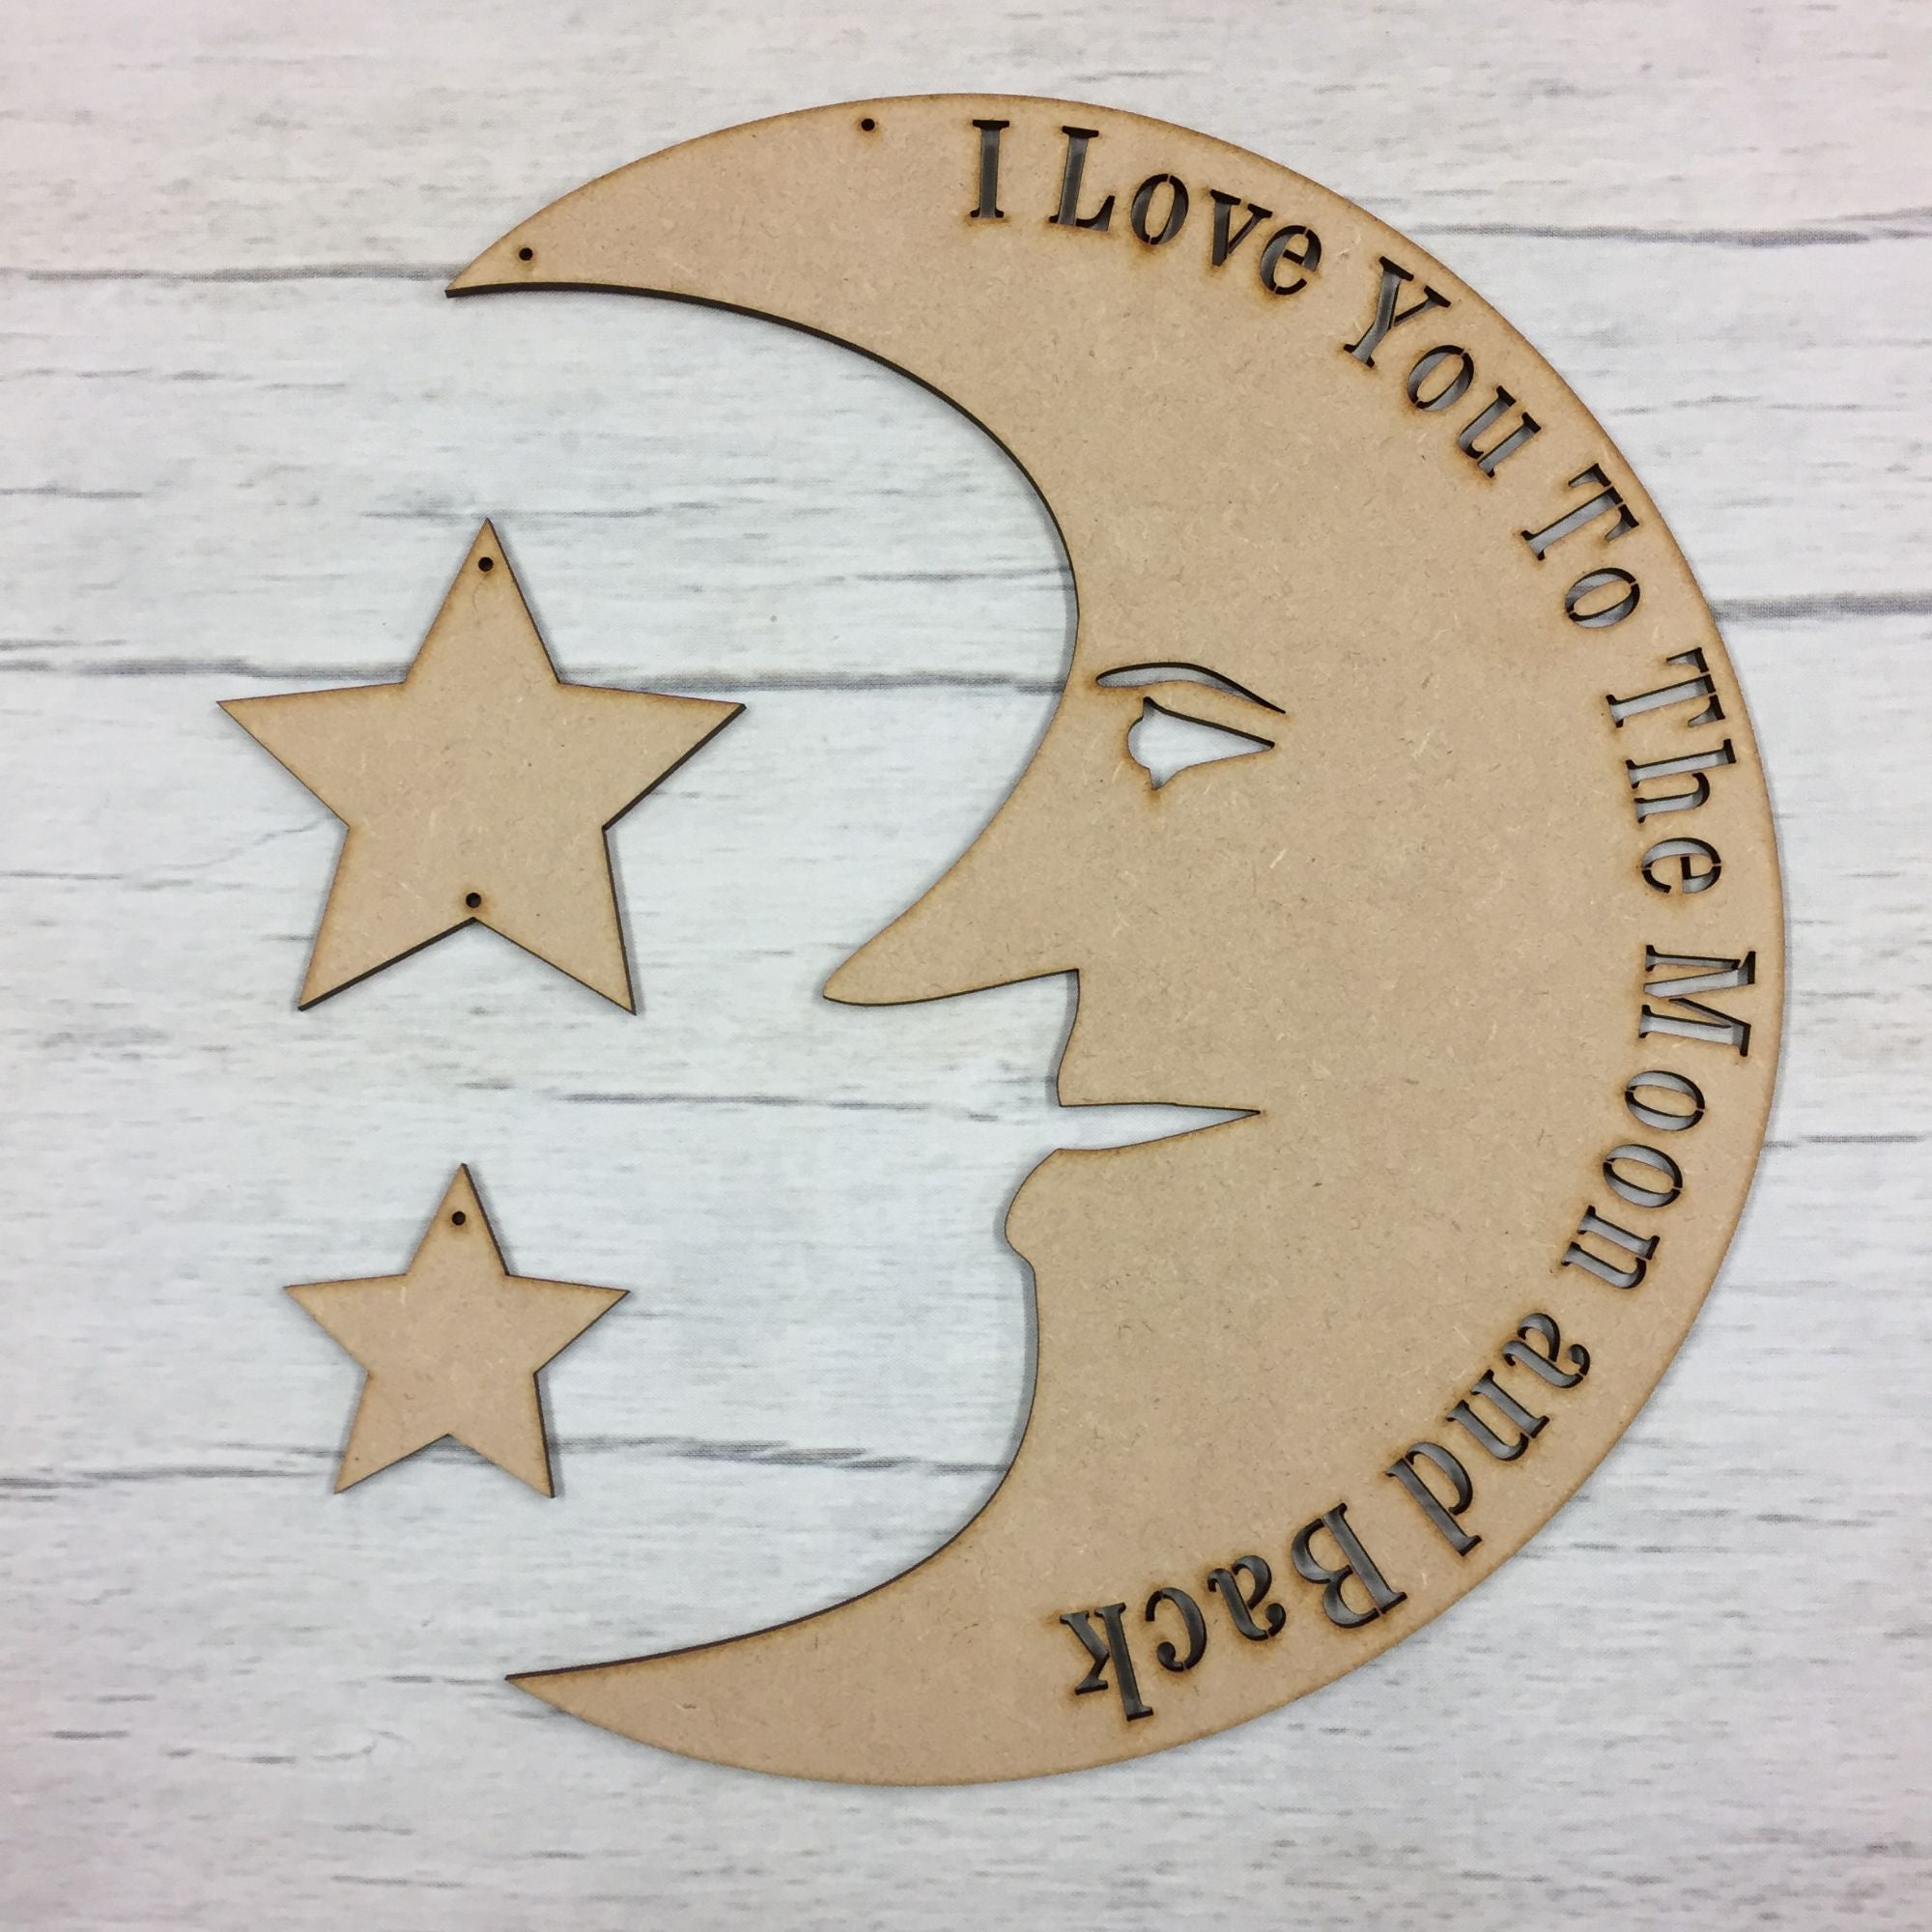 I love you to the moon and back' hanging plaque - Plaque 1